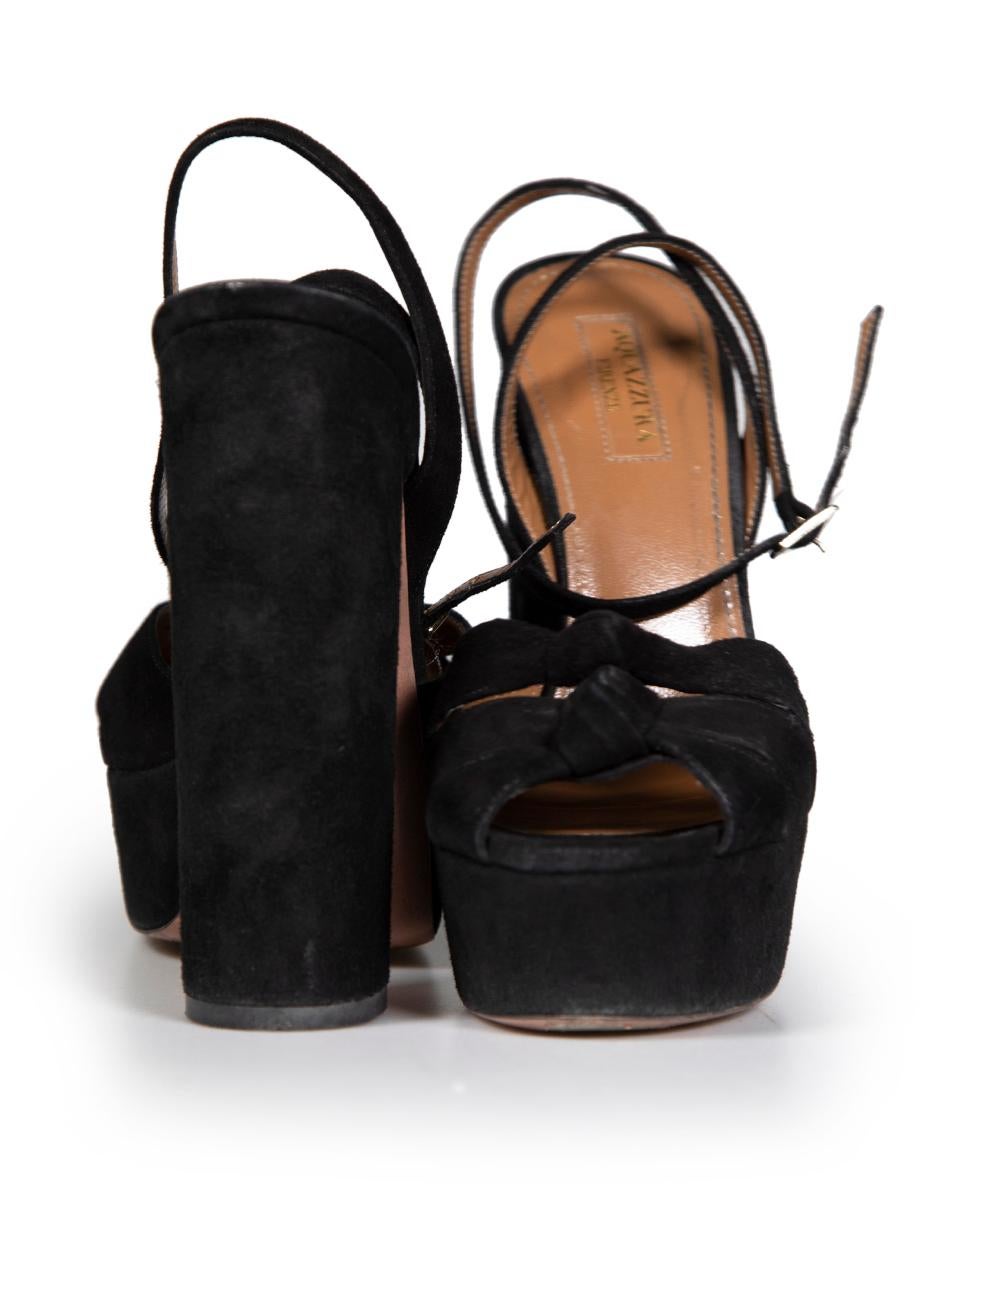 Aquazzura Black Suede Ankle Strap Sandals Size IT 36.5 In Good Condition For Sale In London, GB